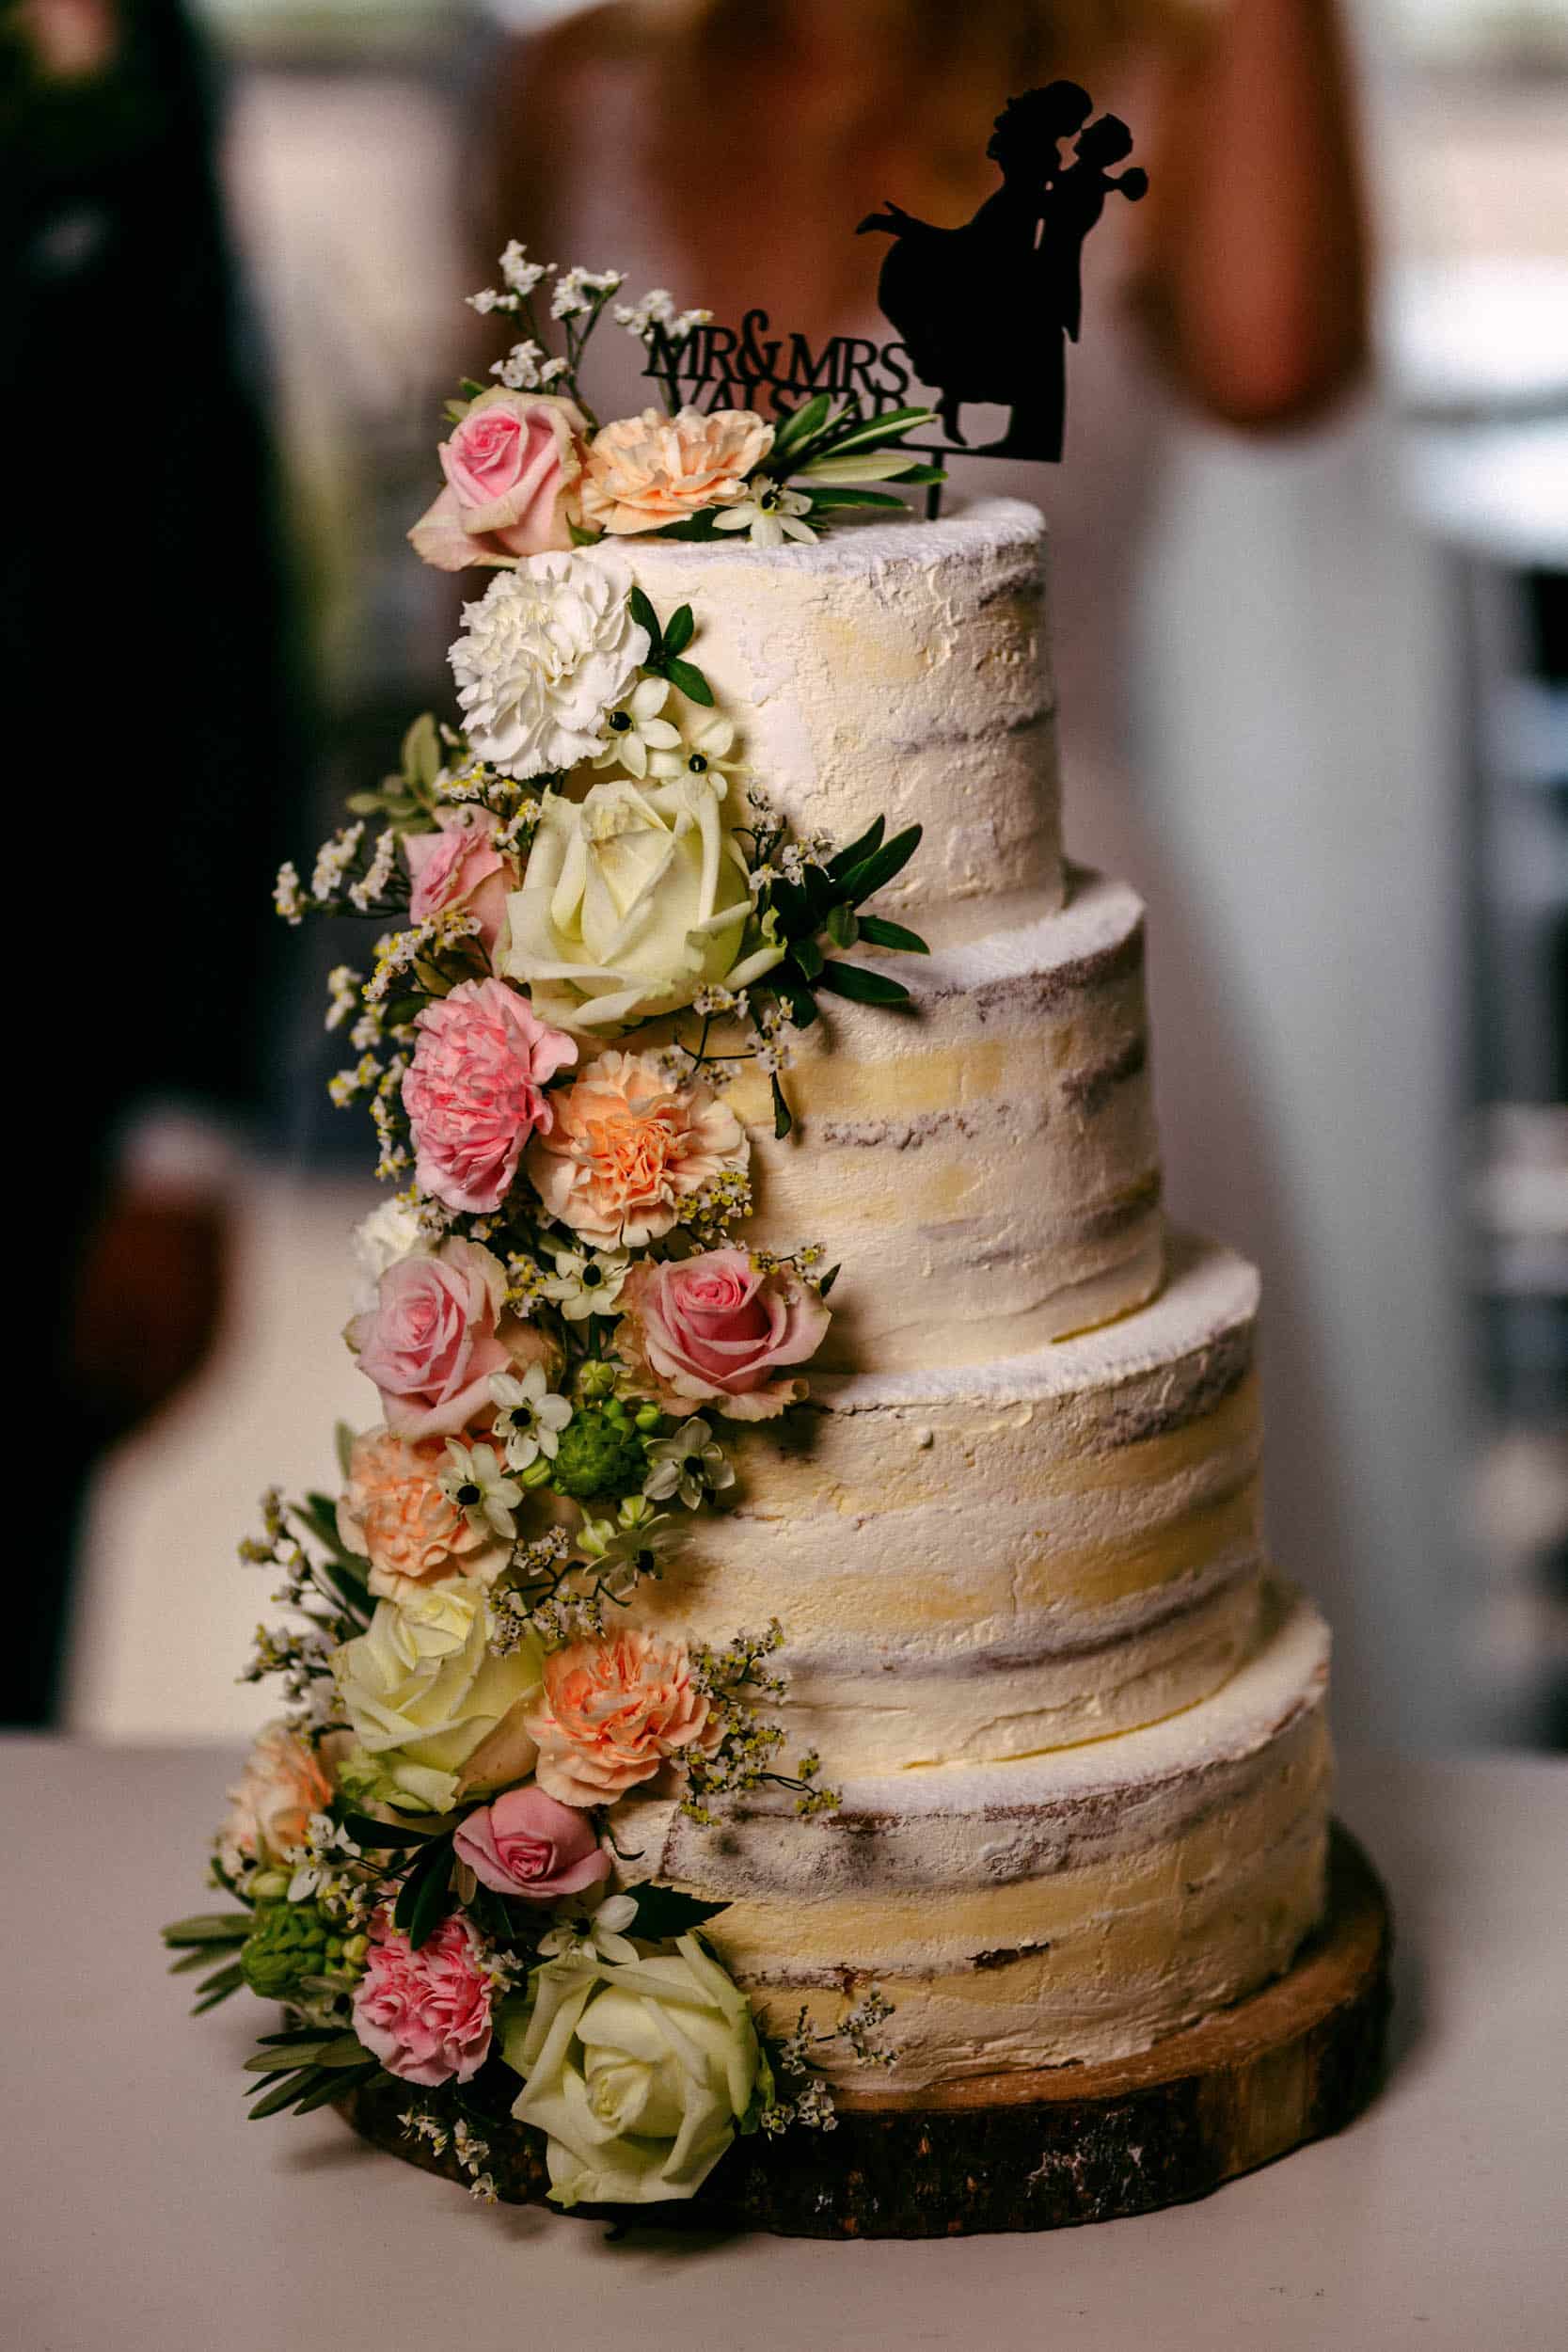 A wedding cake with the silhouette of a bride and groom, inspired by the unique charm of My torpedo shed.